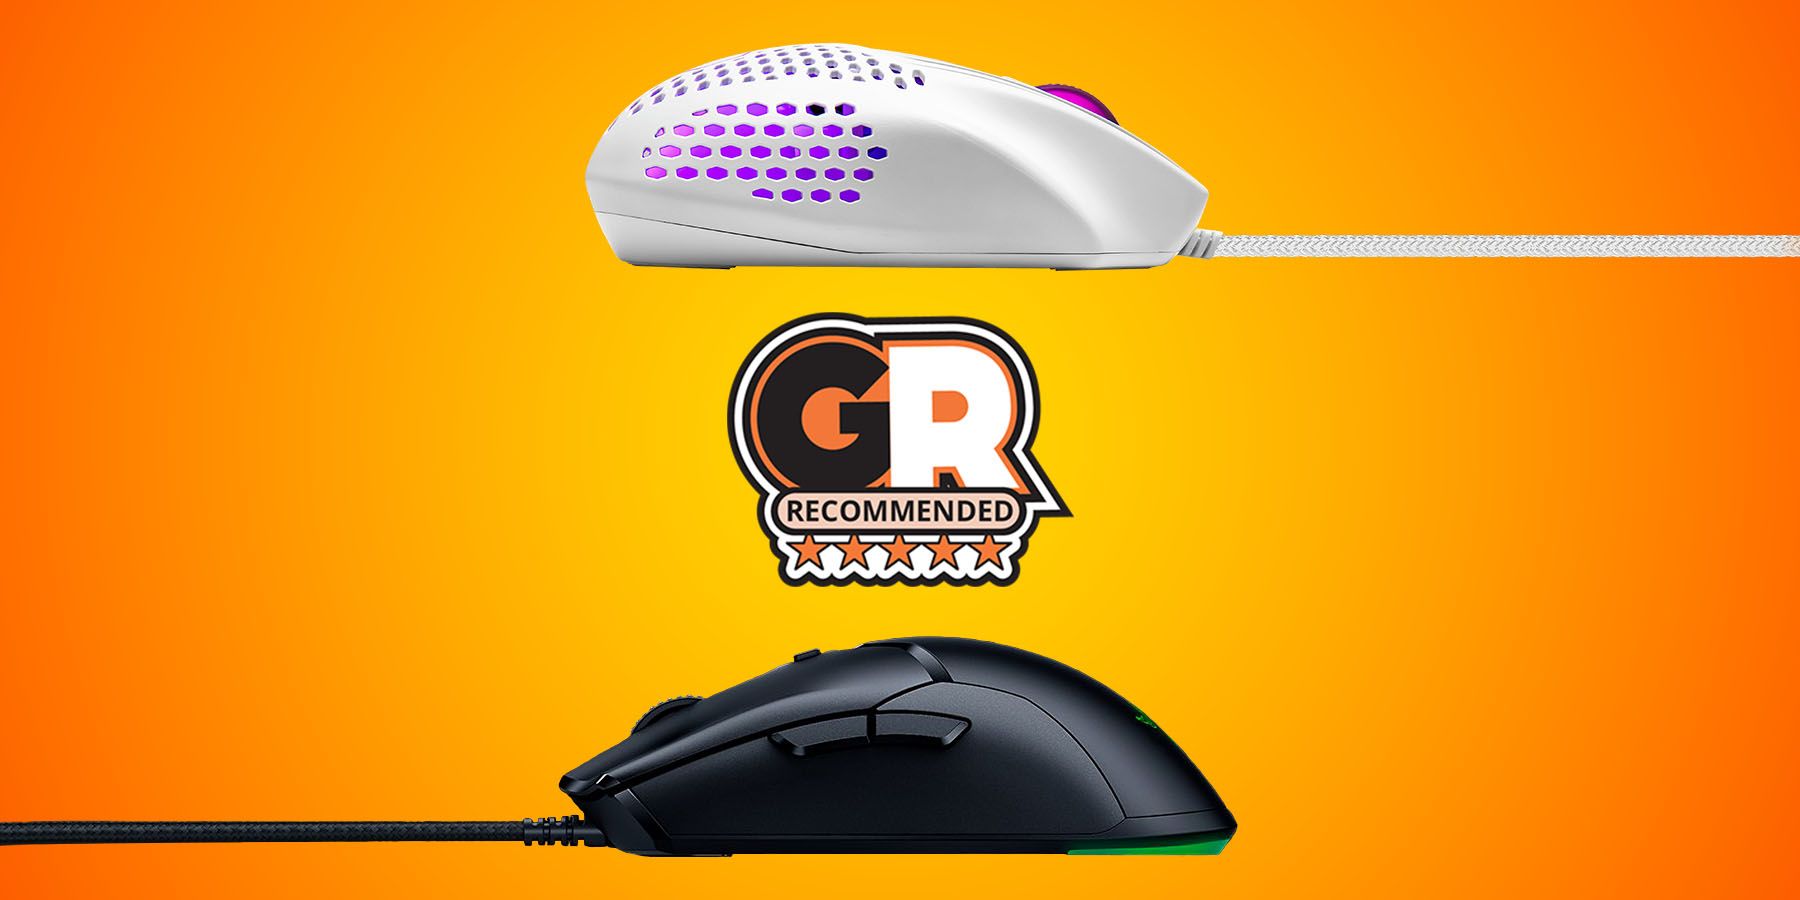 The Best Gaming Mice Under $50 Thumb